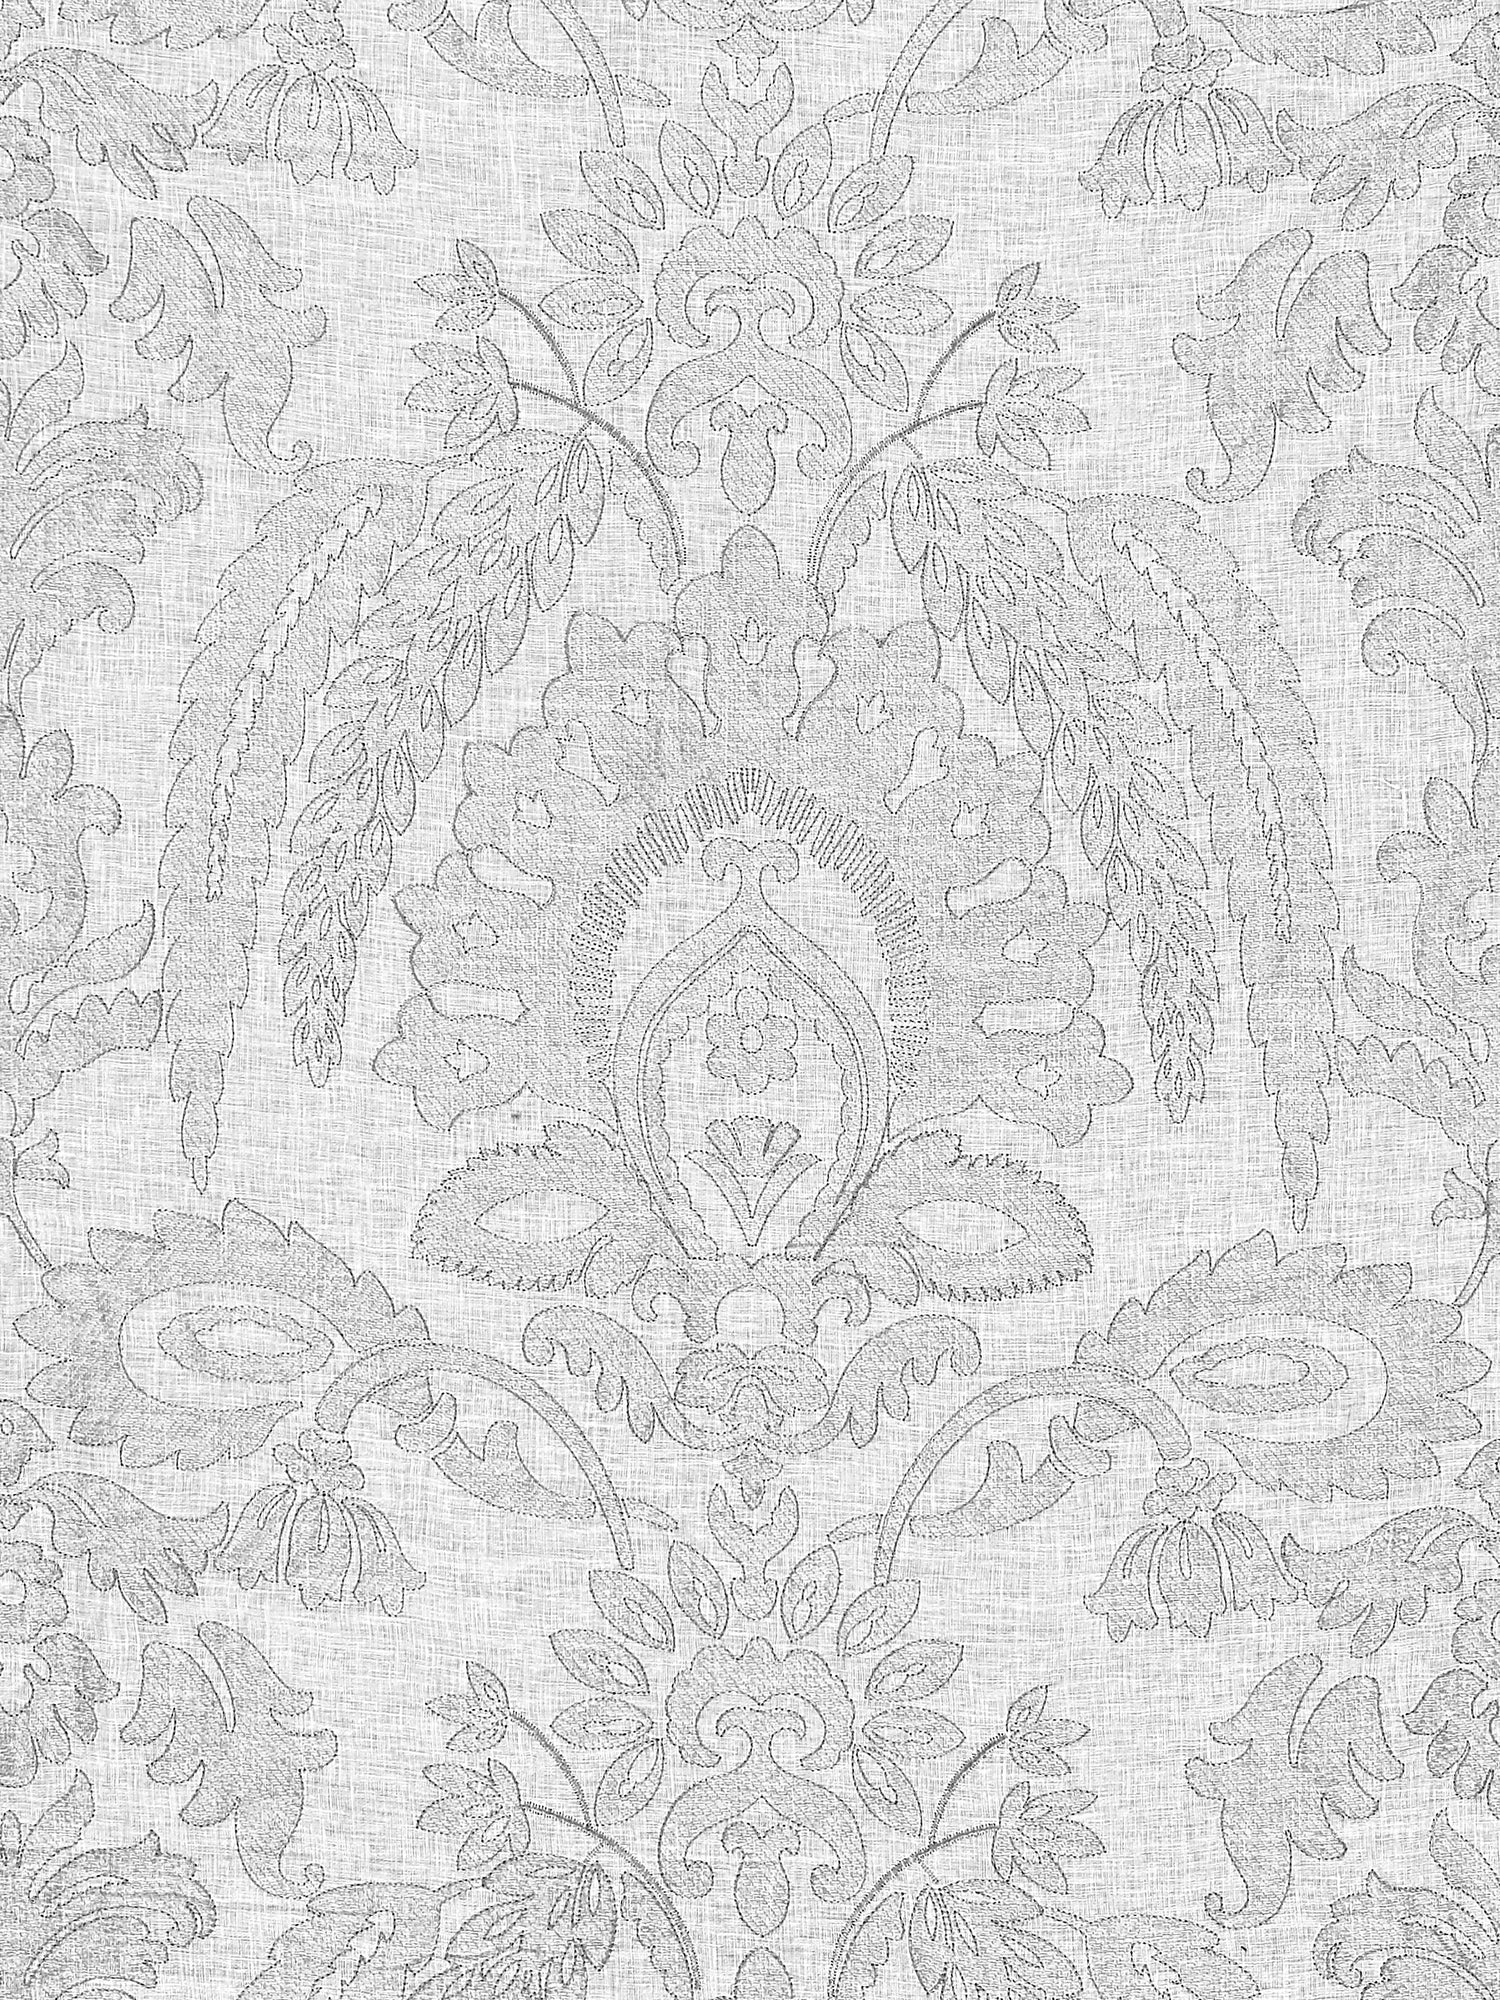 Lia Damask Sheer fabric in haze color - pattern number SC 000227053 - by Scalamandre in the Scalamandre Fabrics Book 1 collection